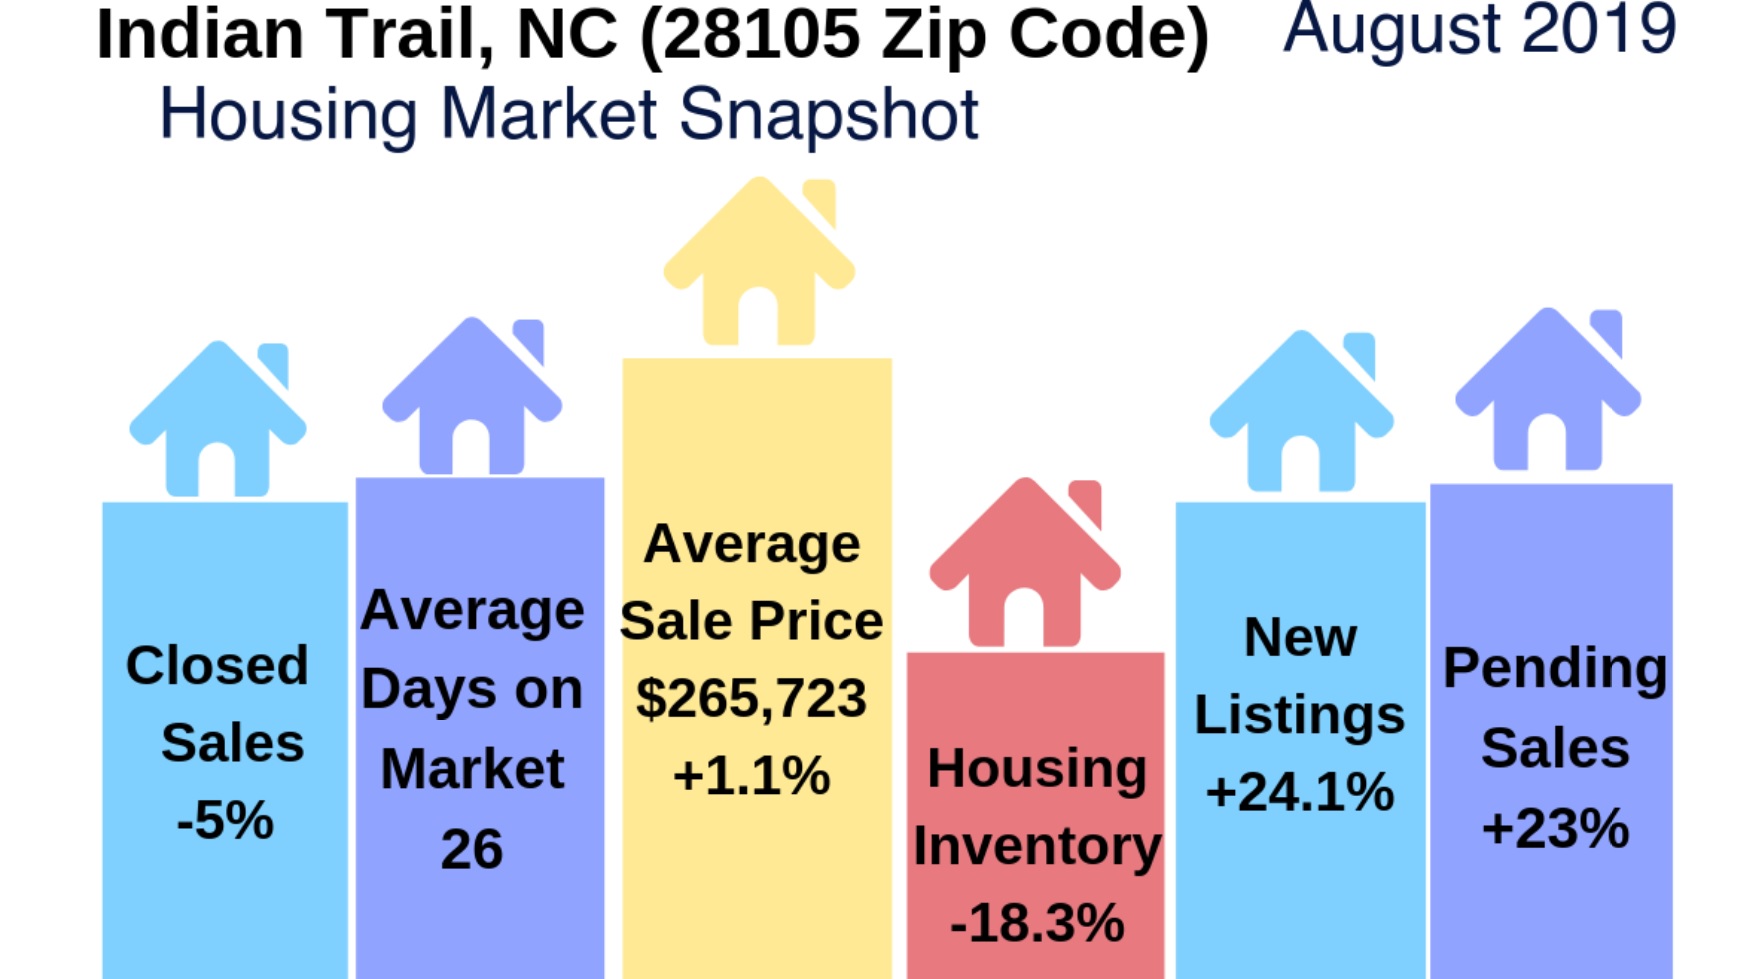 Indian Trail Real Estate August 2019